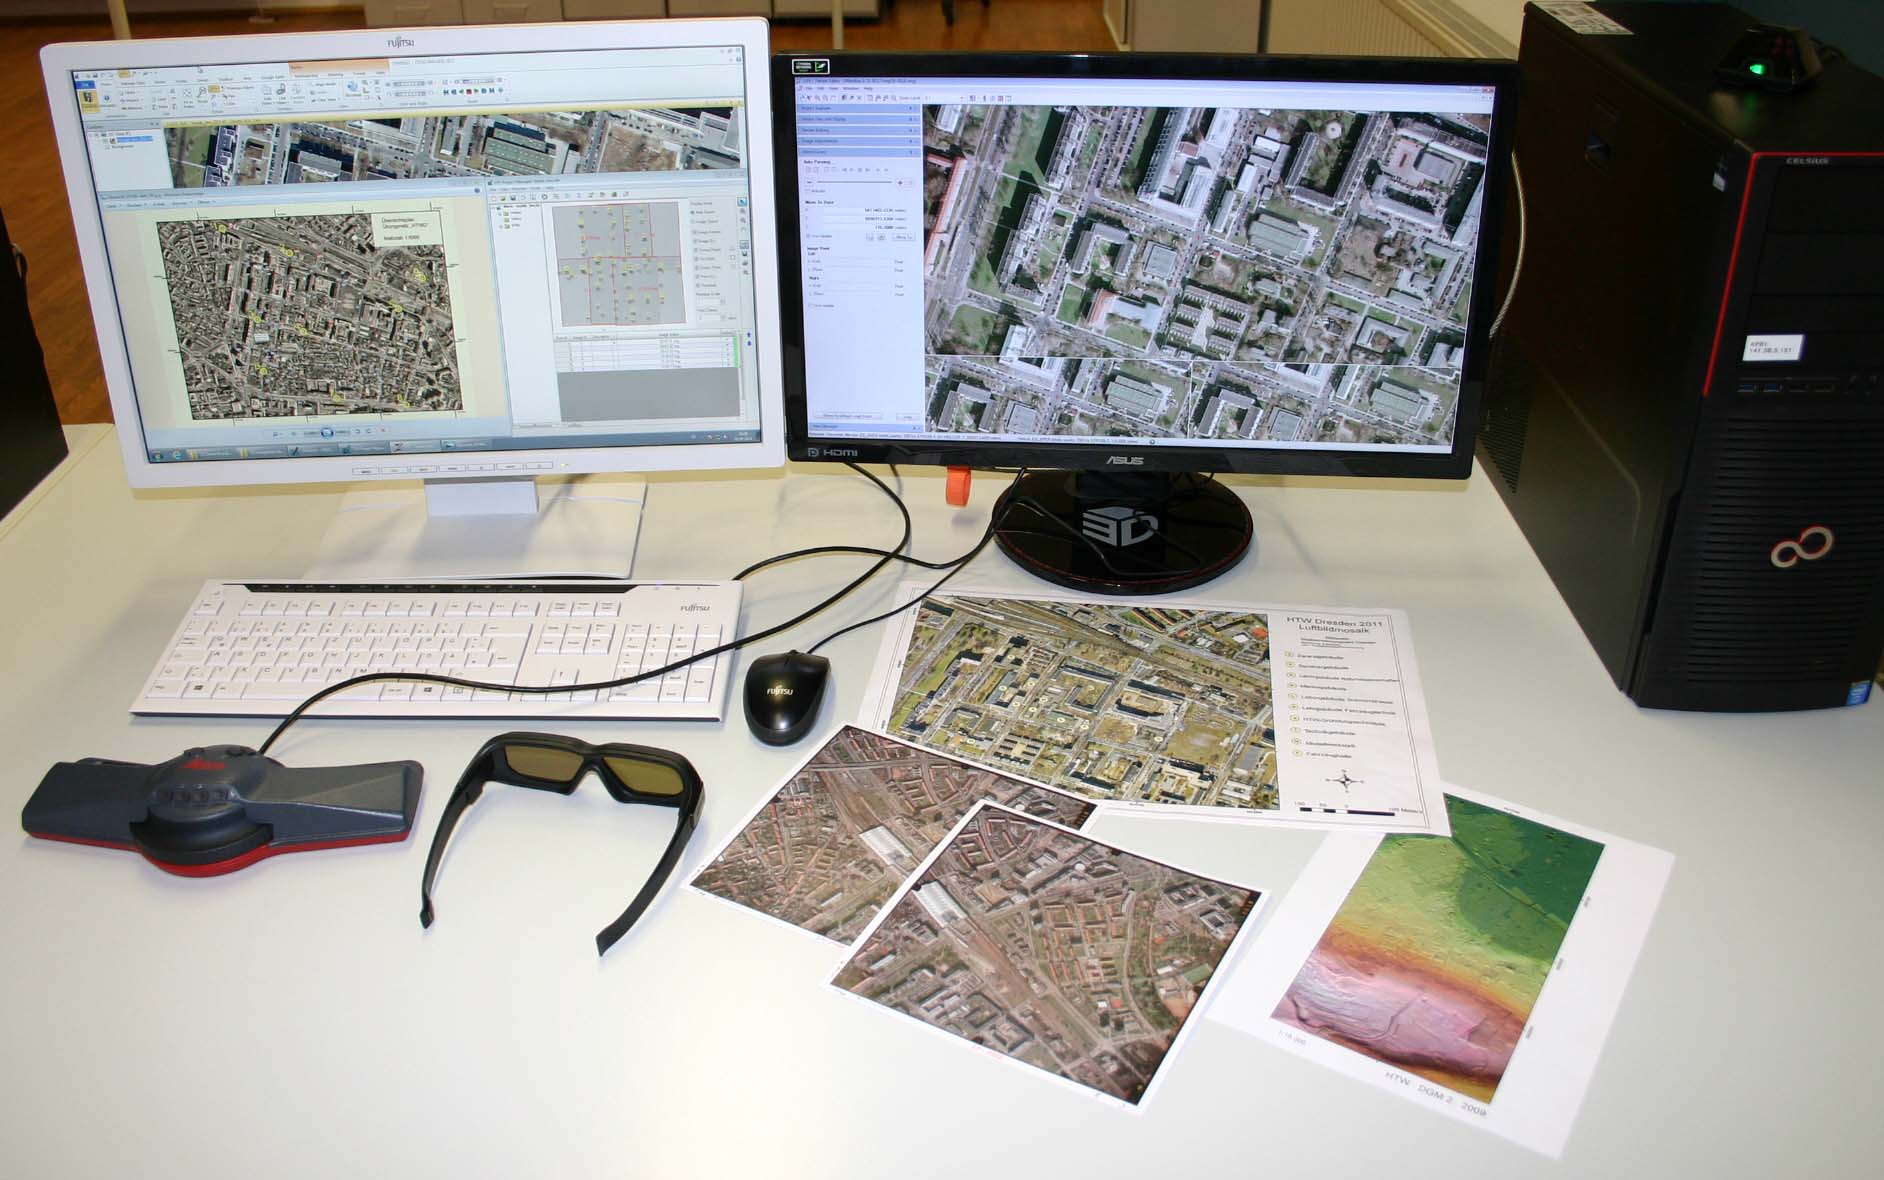 Stereo workstation in the photogrammetry/remote sensing laboratory